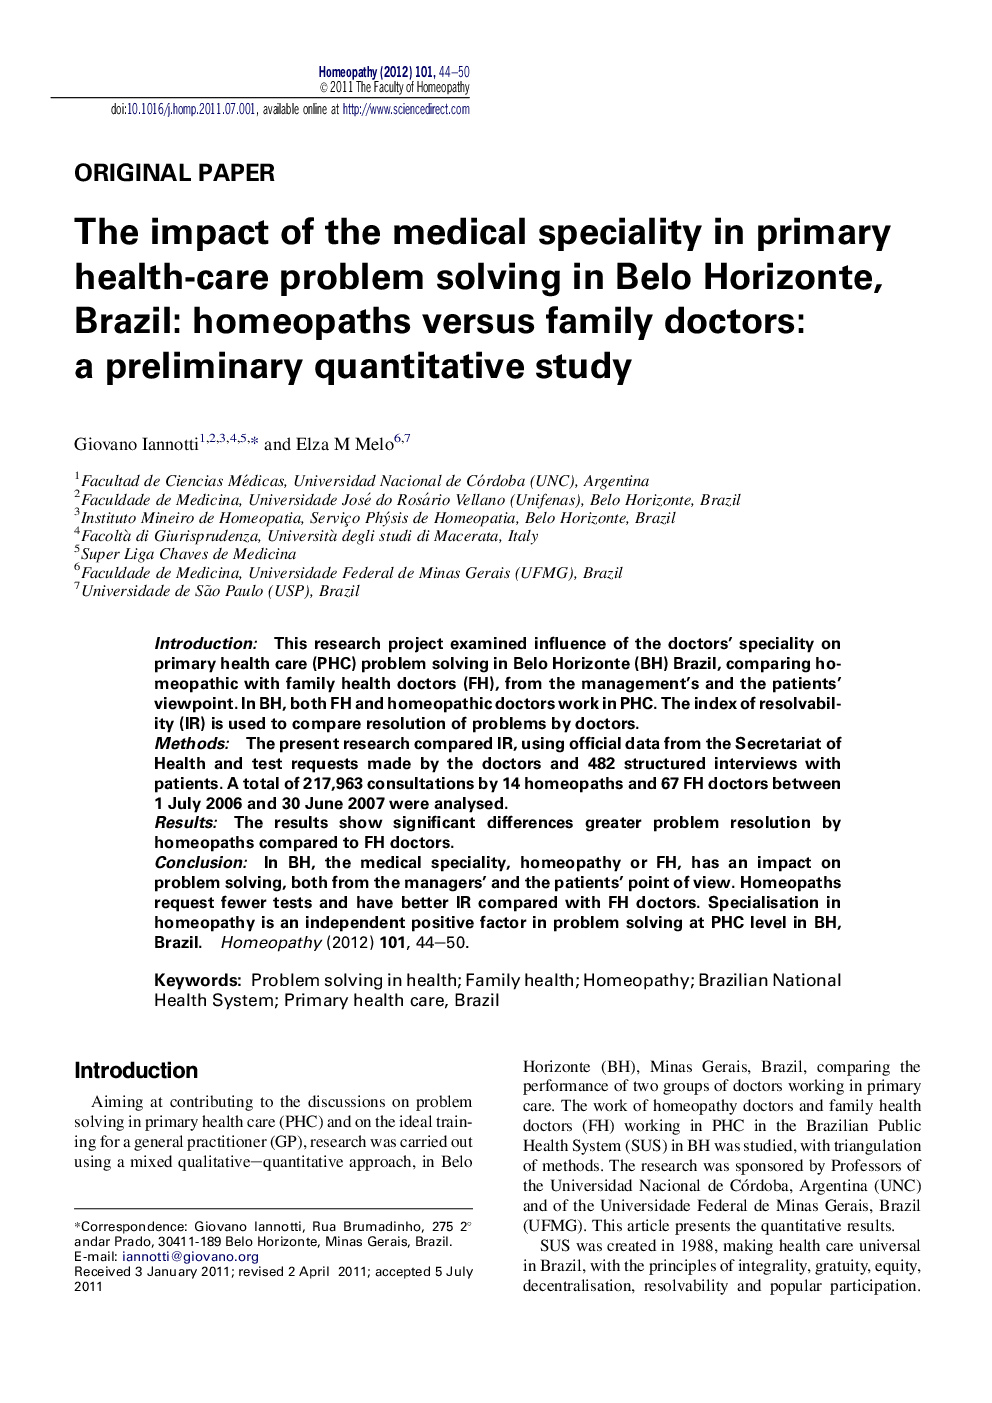 The impact of the medical speciality in primary health-care problem solving in Belo Horizonte, Brazil: homeopaths versus family doctors: a preliminary quantitative study